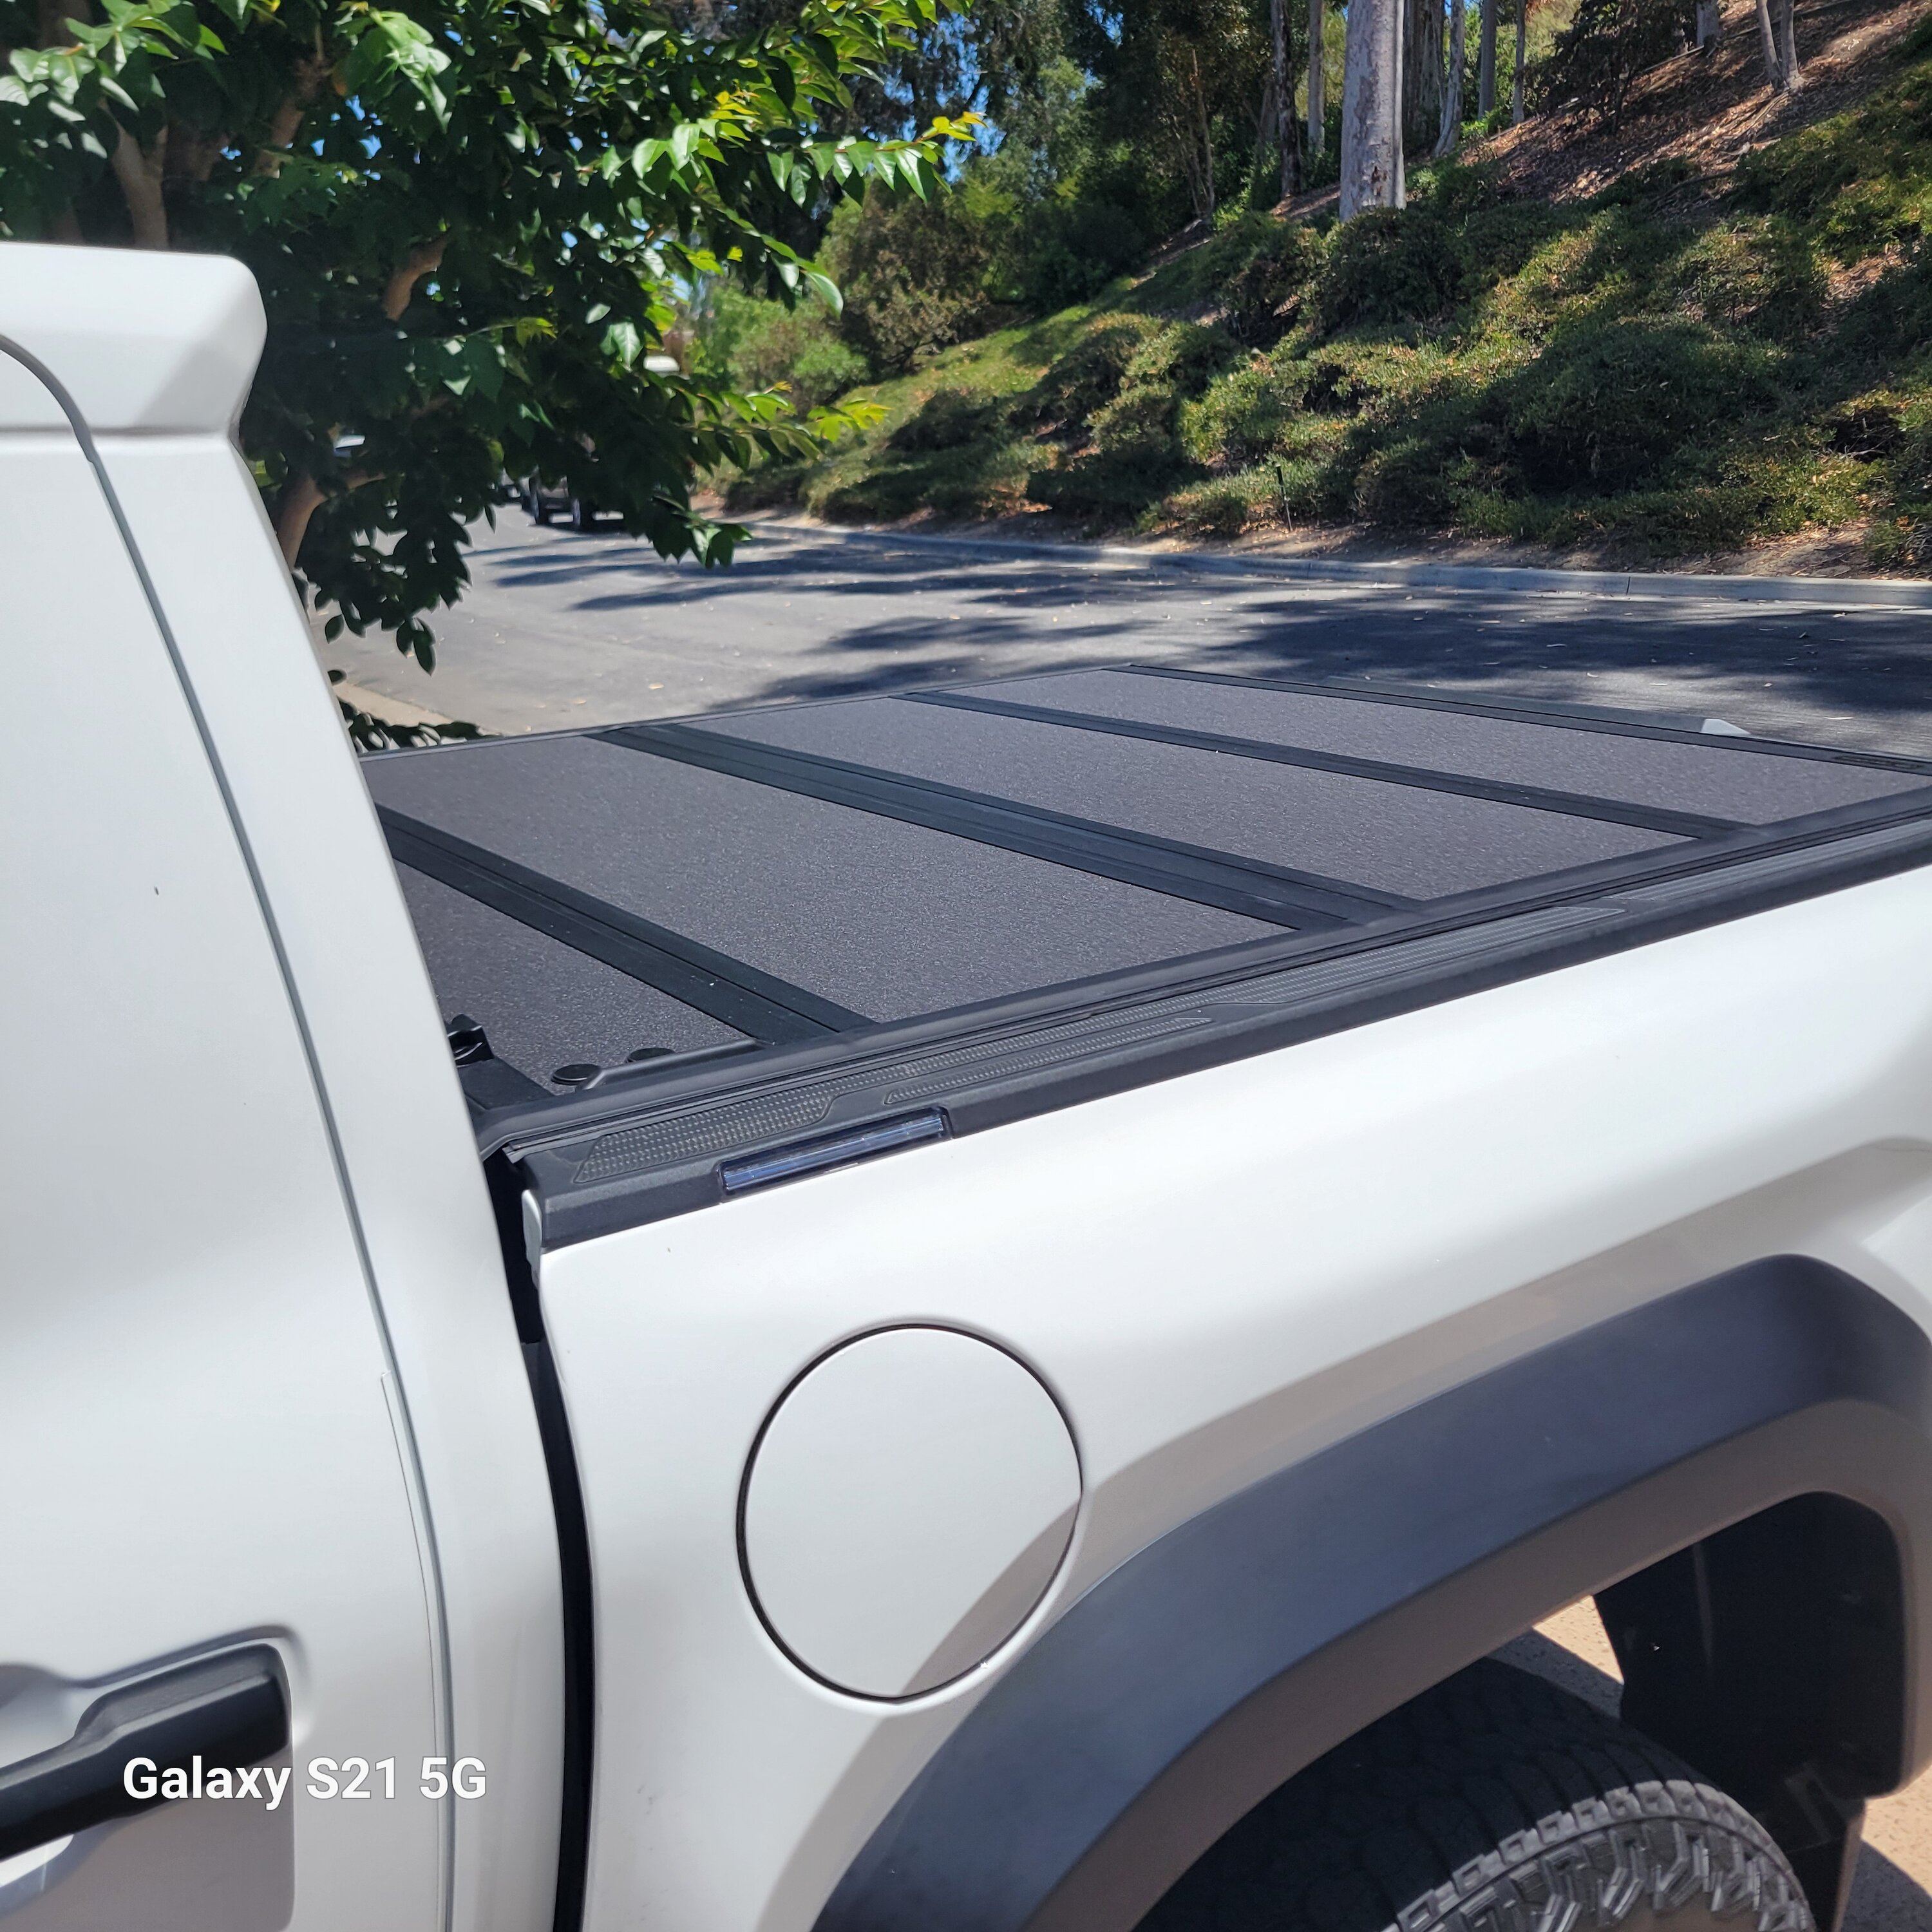 2024 Tacoma 6' Foot Bed Toyota OEM Tonneau Cover Installed (Part Number # PT954-35241) on 2024 Tacoma TRD Sport 20240625_132107